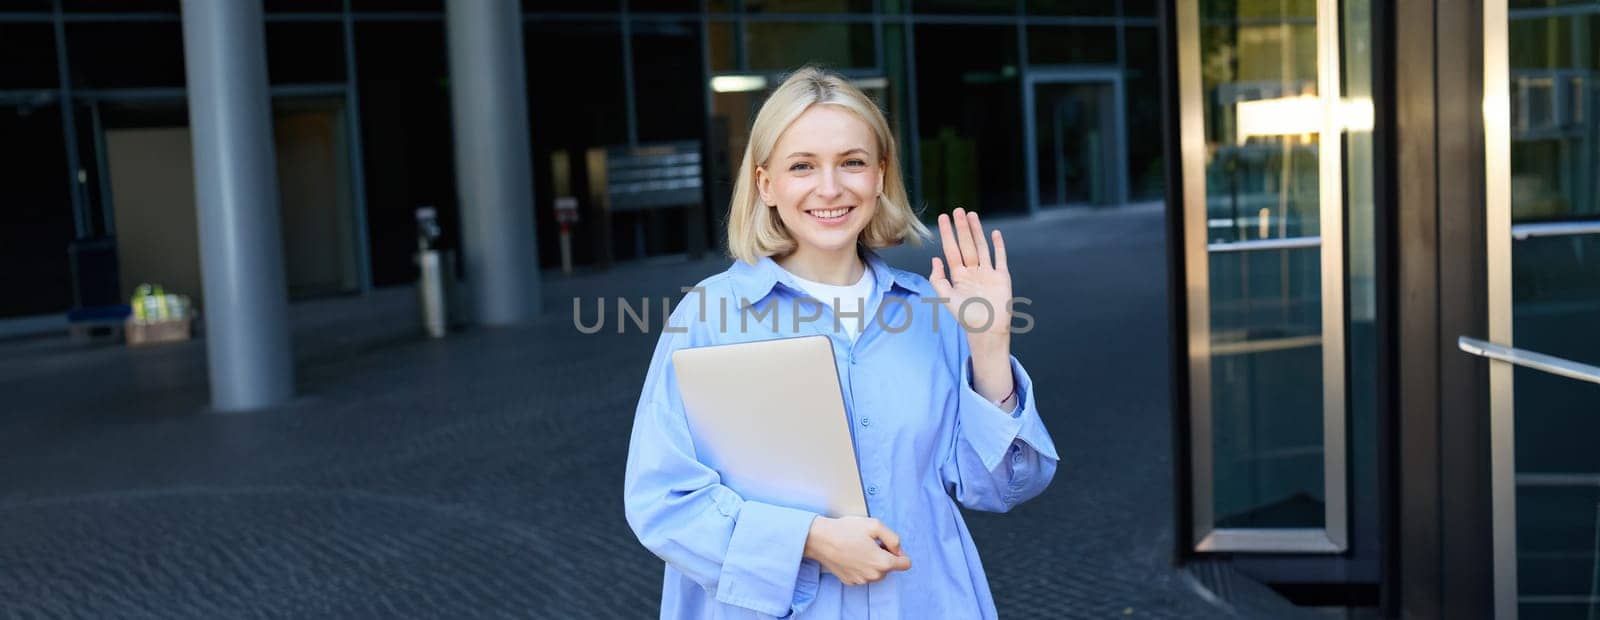 Friendly smiling student, blond girl with notebooks, tutor waving hand at camera, saying hello, standing near office building outdoors.